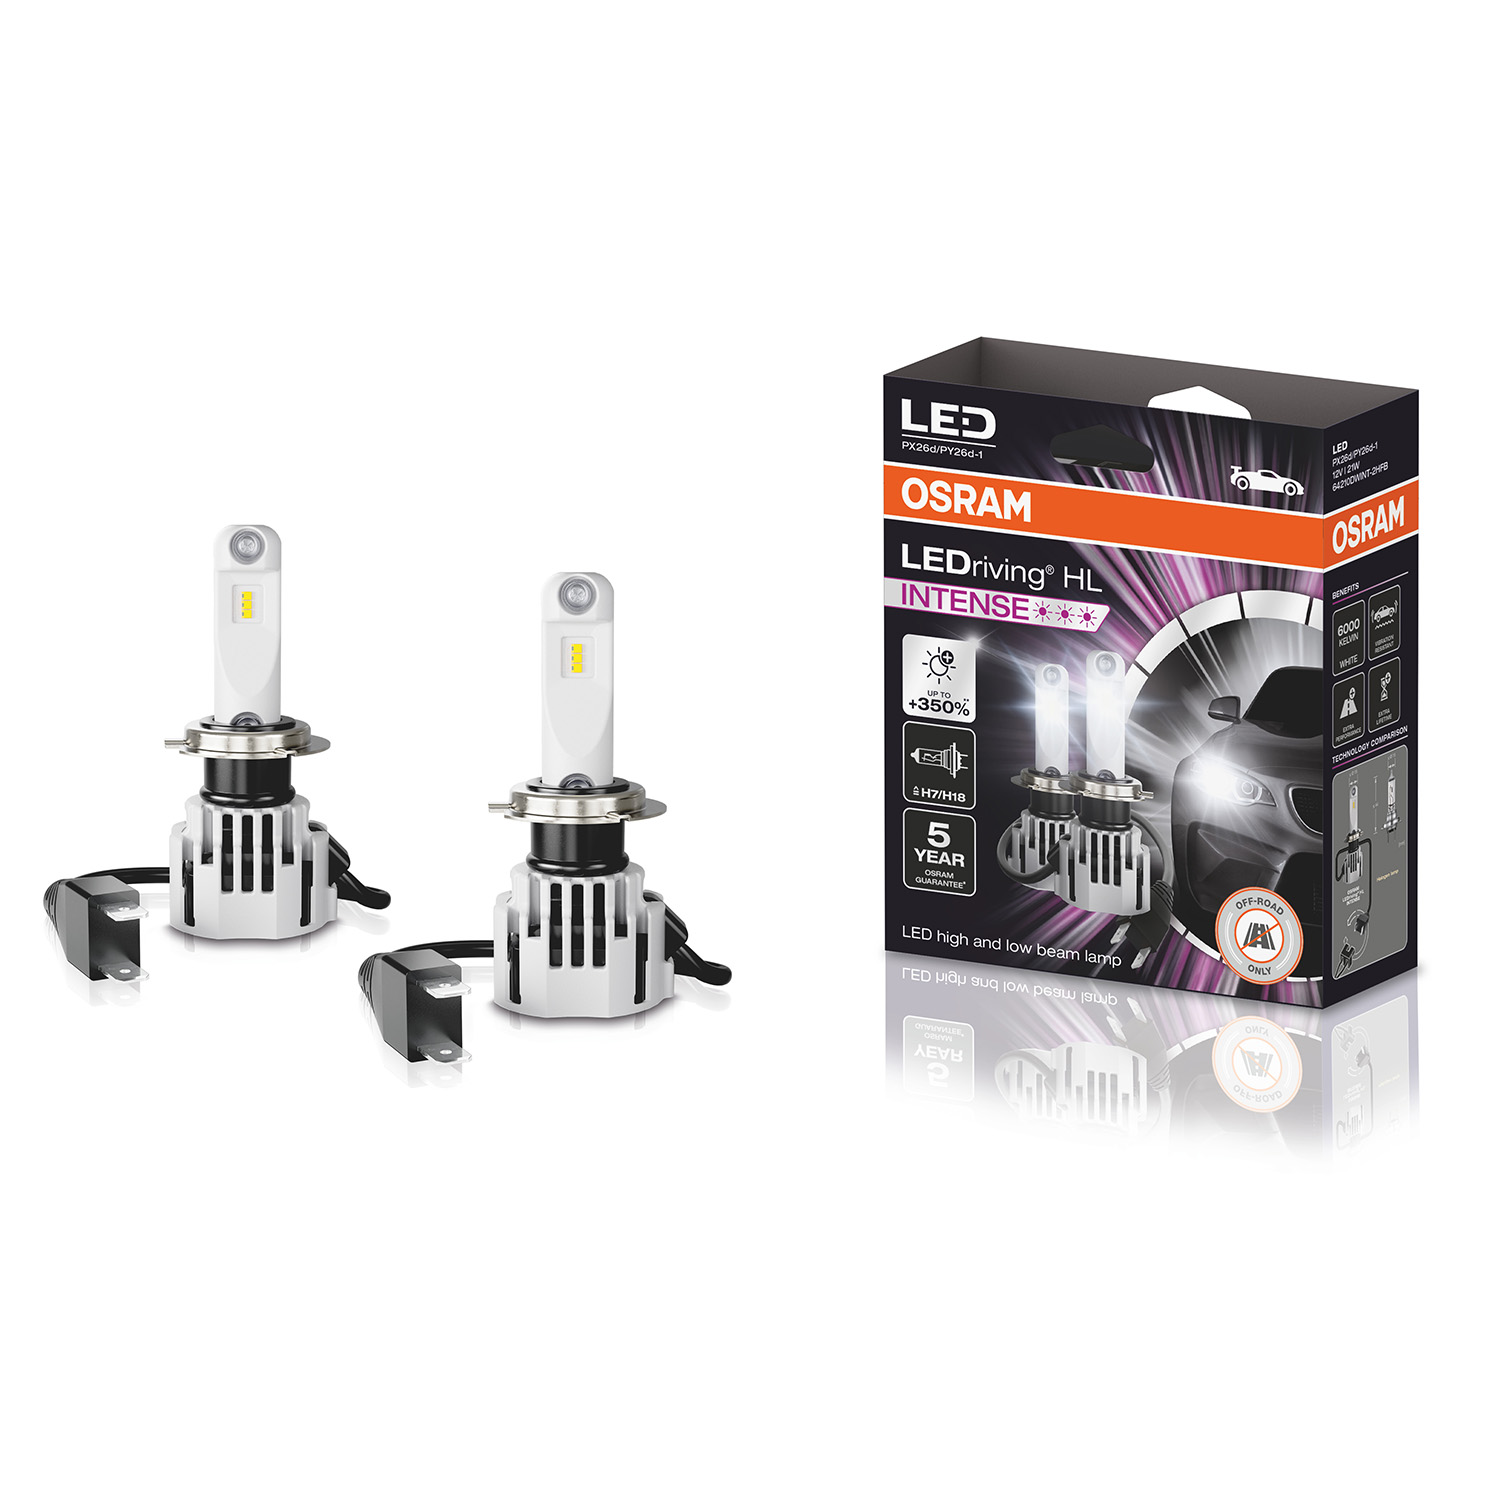 Compatibility list for LEDriving HL BRIGHT H7 headlight lamps